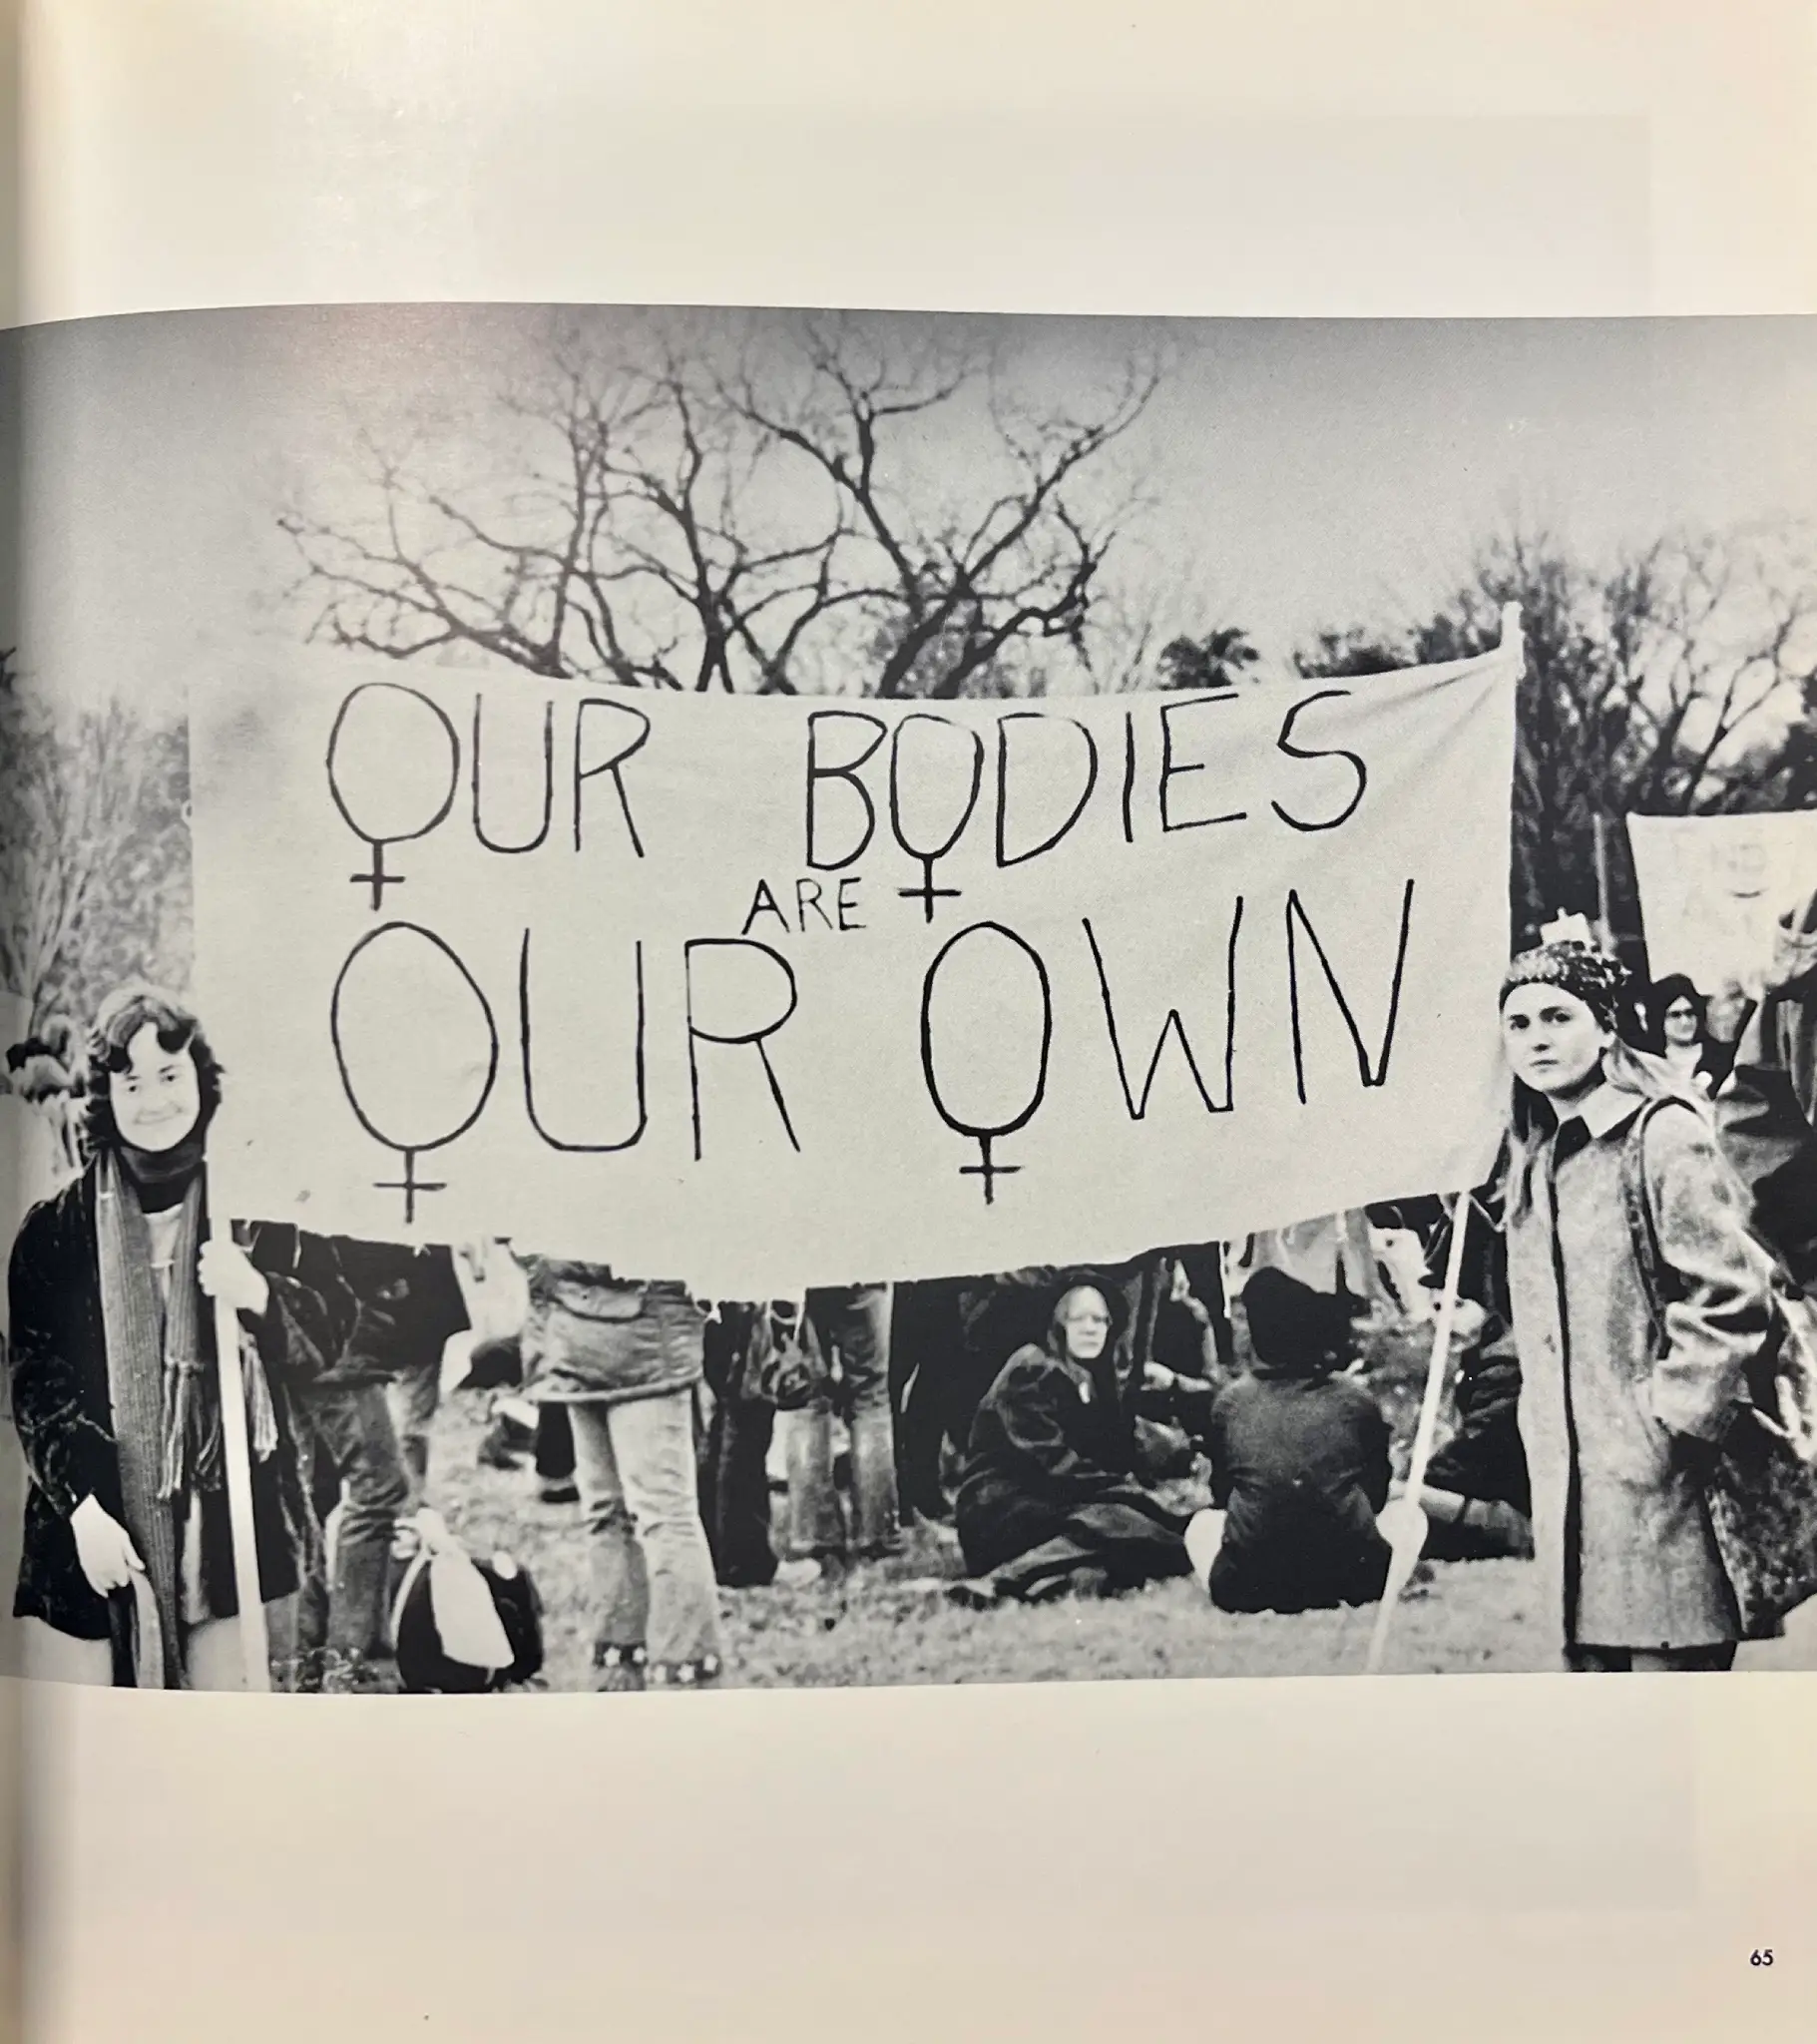 Two women holding a banner stating "our bodies are our own".